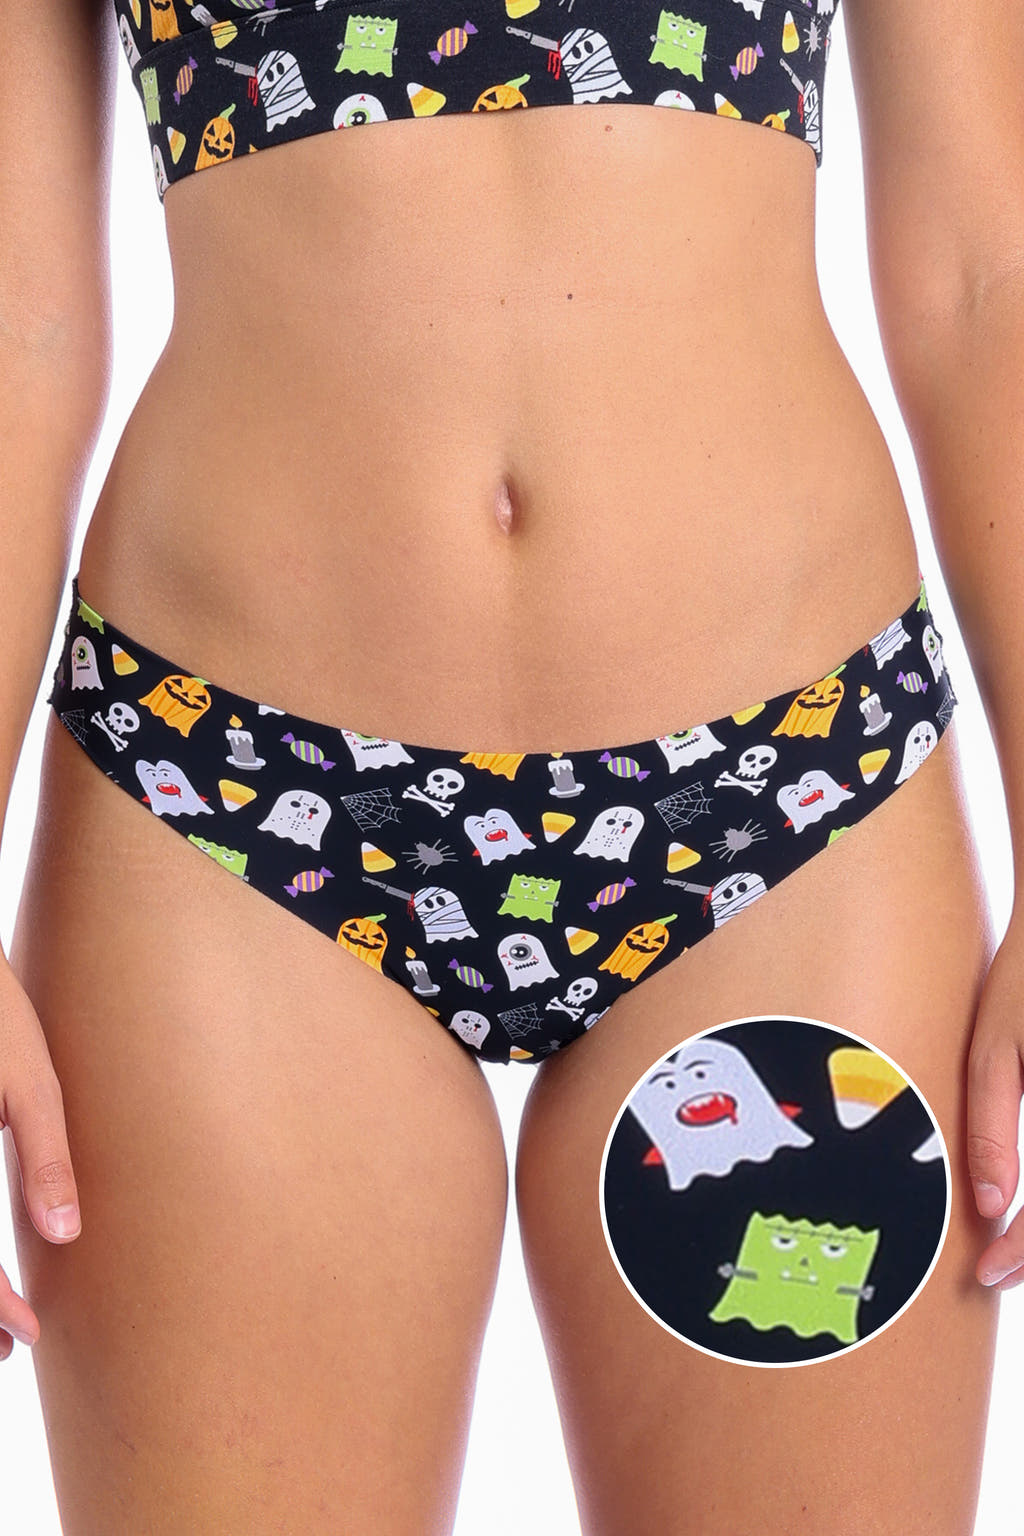 A close-up of The Good Ghouls Halloween Themed Seamless Thong featuring cute ghosts inspired by favorite Halloween monsters.